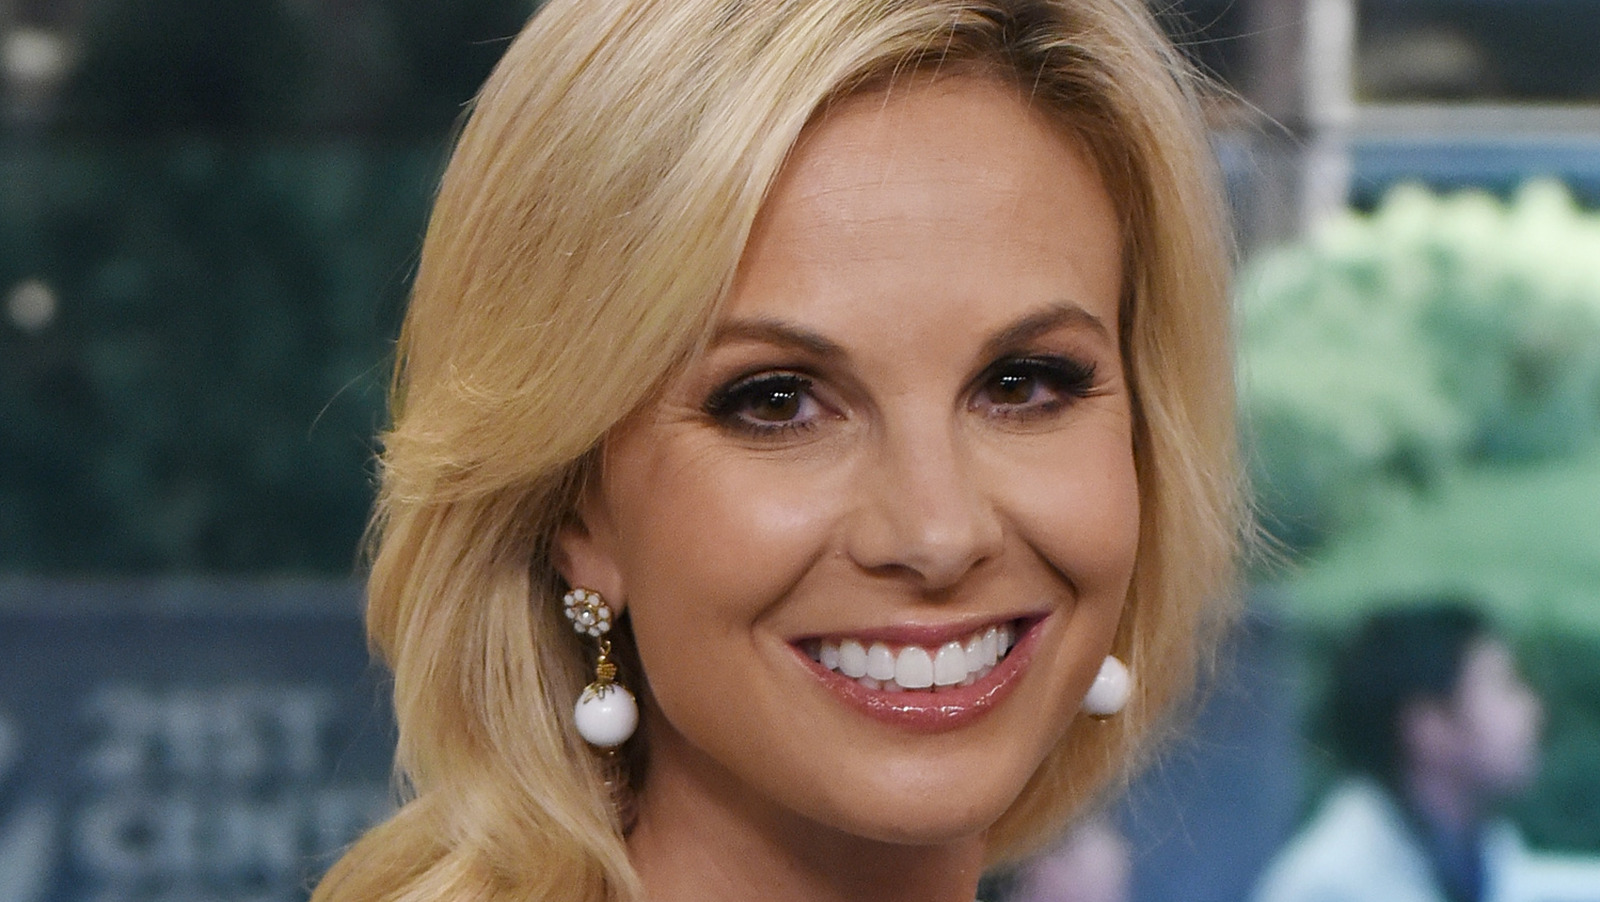 The Real Reason Elisabeth Hasselbeck Was Fired From The View